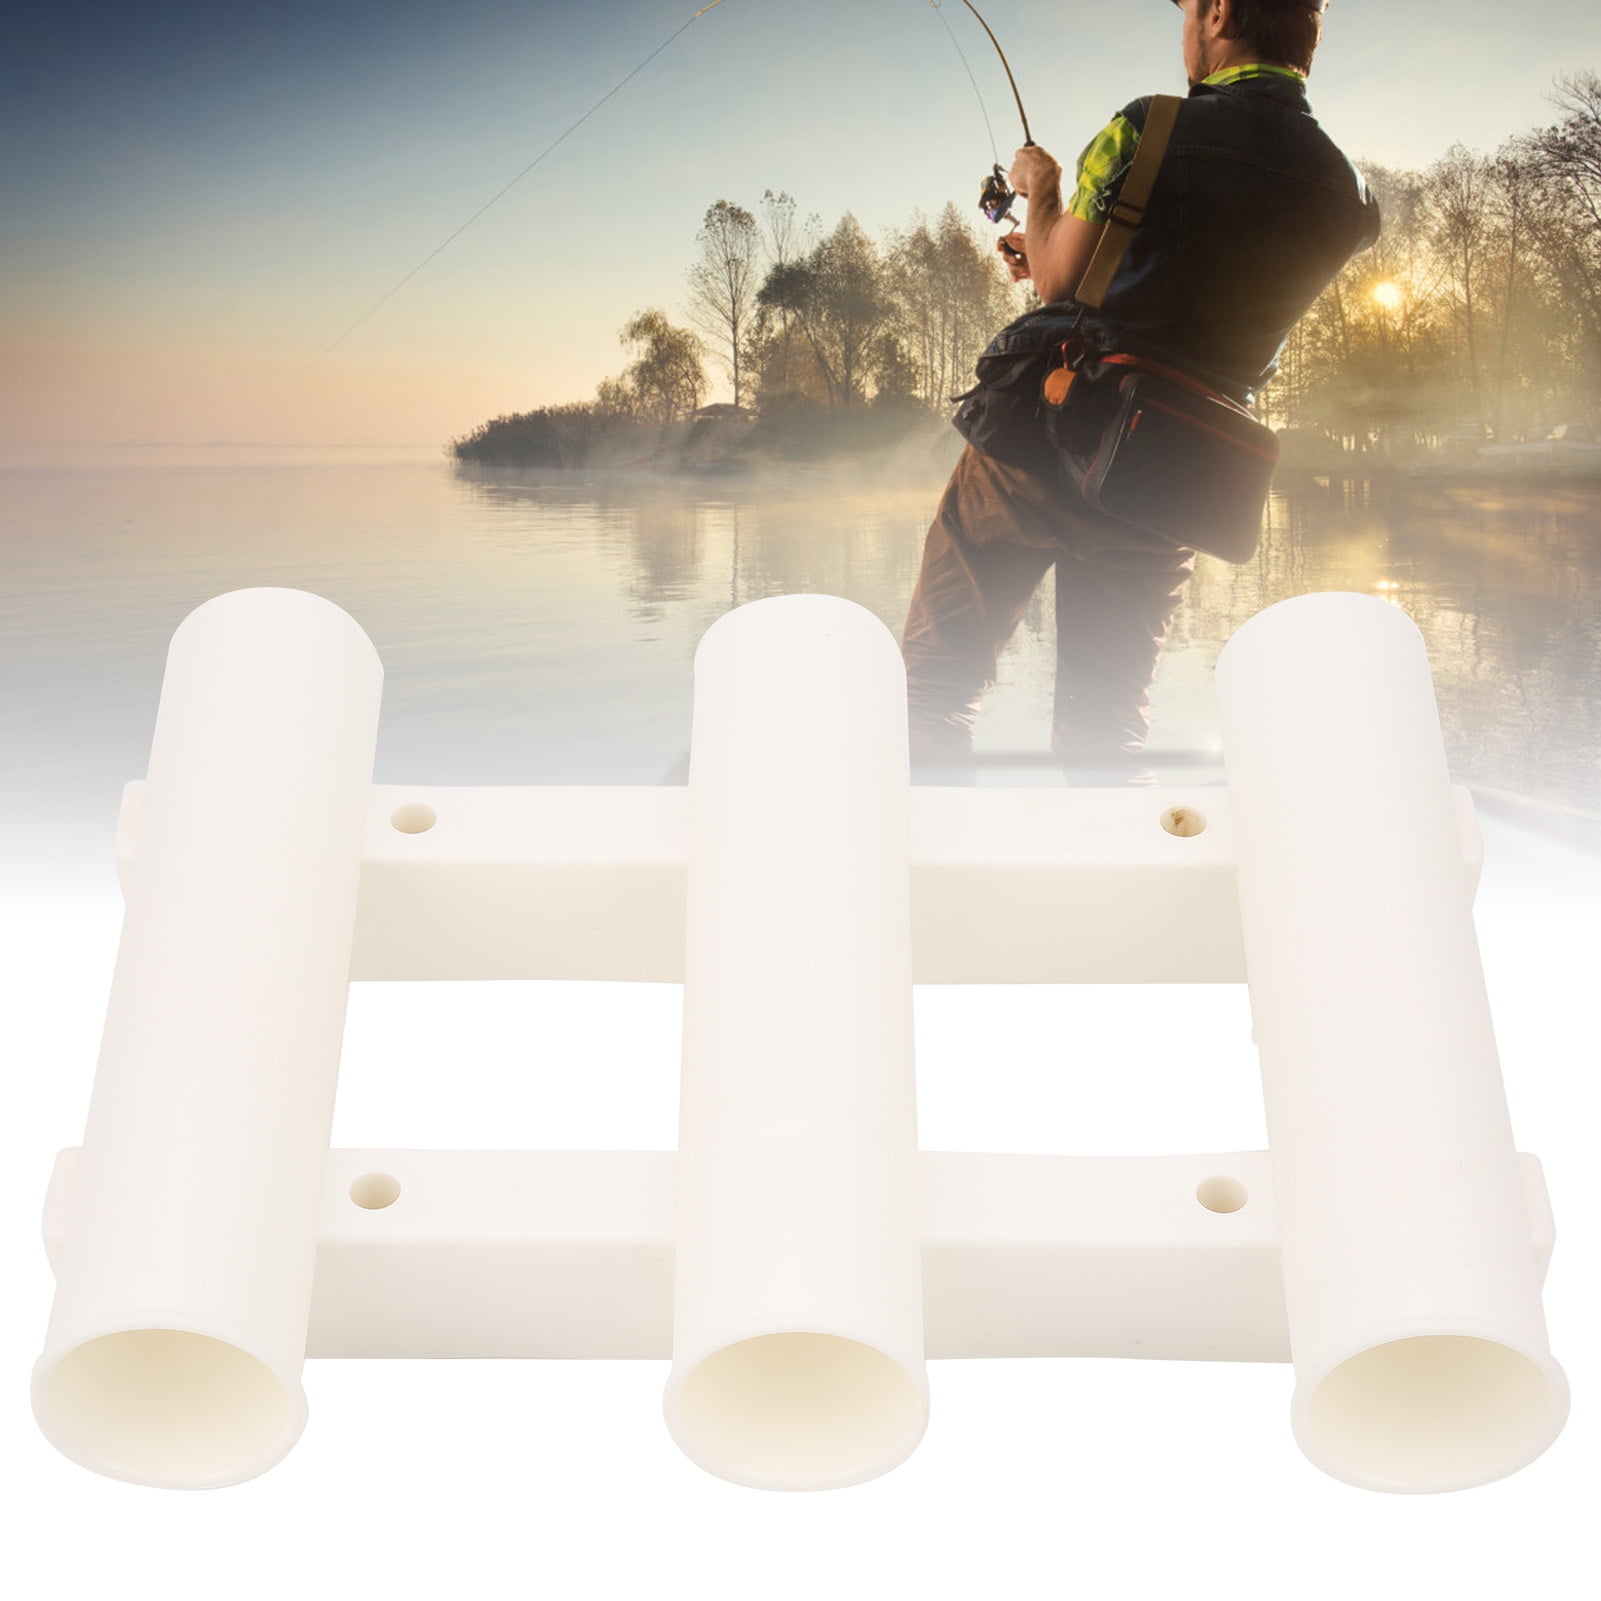 Details about   White Durable Tube Rod Holder Rack,Plastic 3-Rod Fishing Holders with Tools Slot 